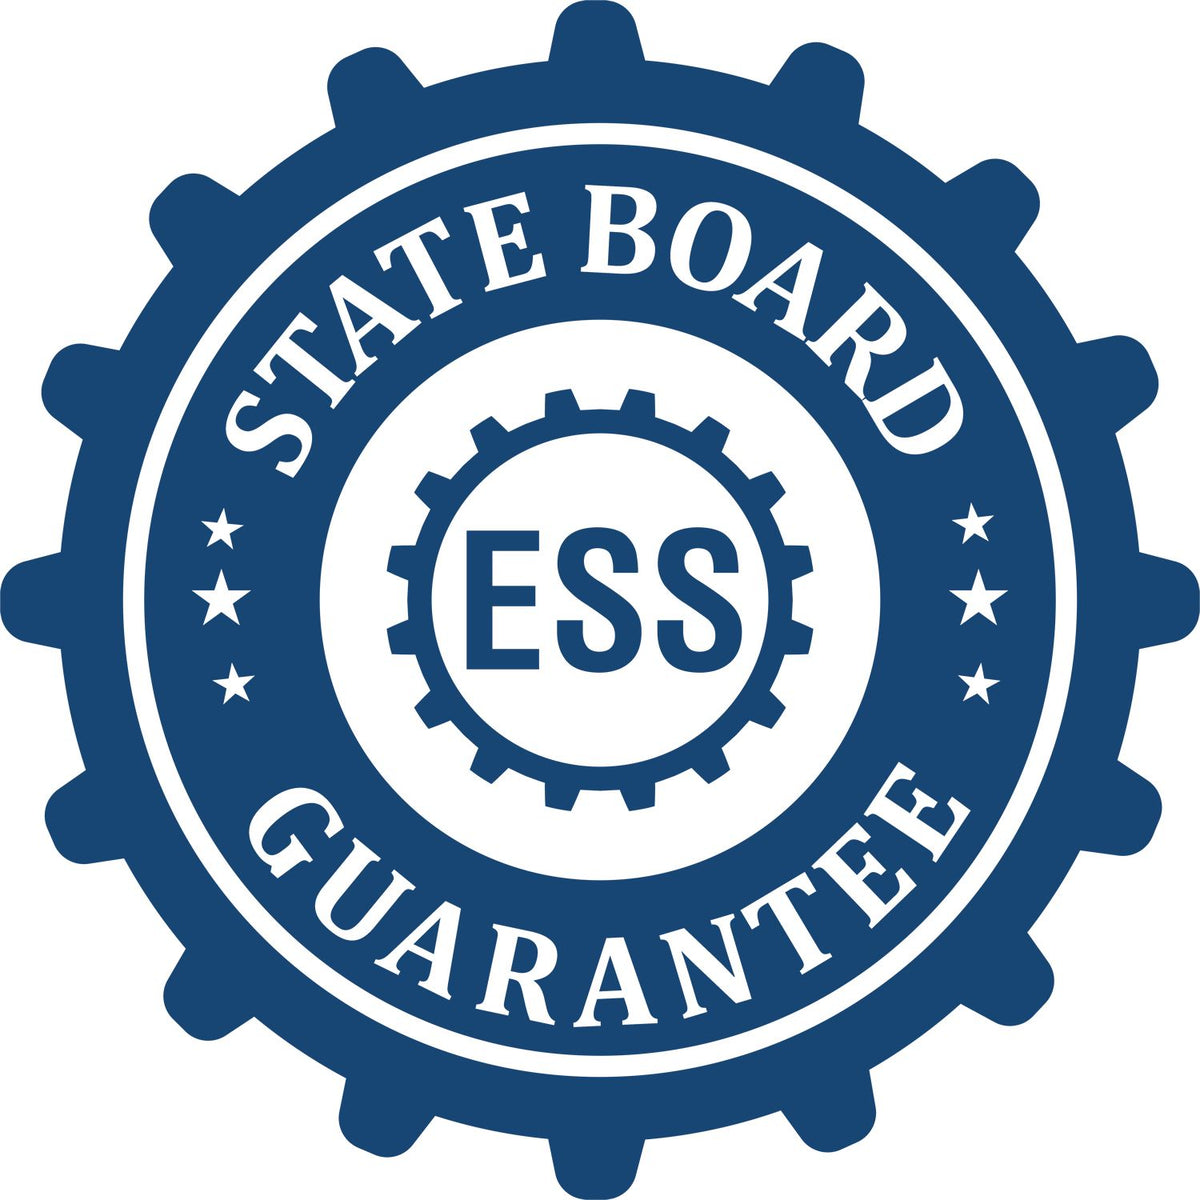 An emblem in a gear shape illustrating a state board guarantee for the North Dakota Geologist Desk Seal